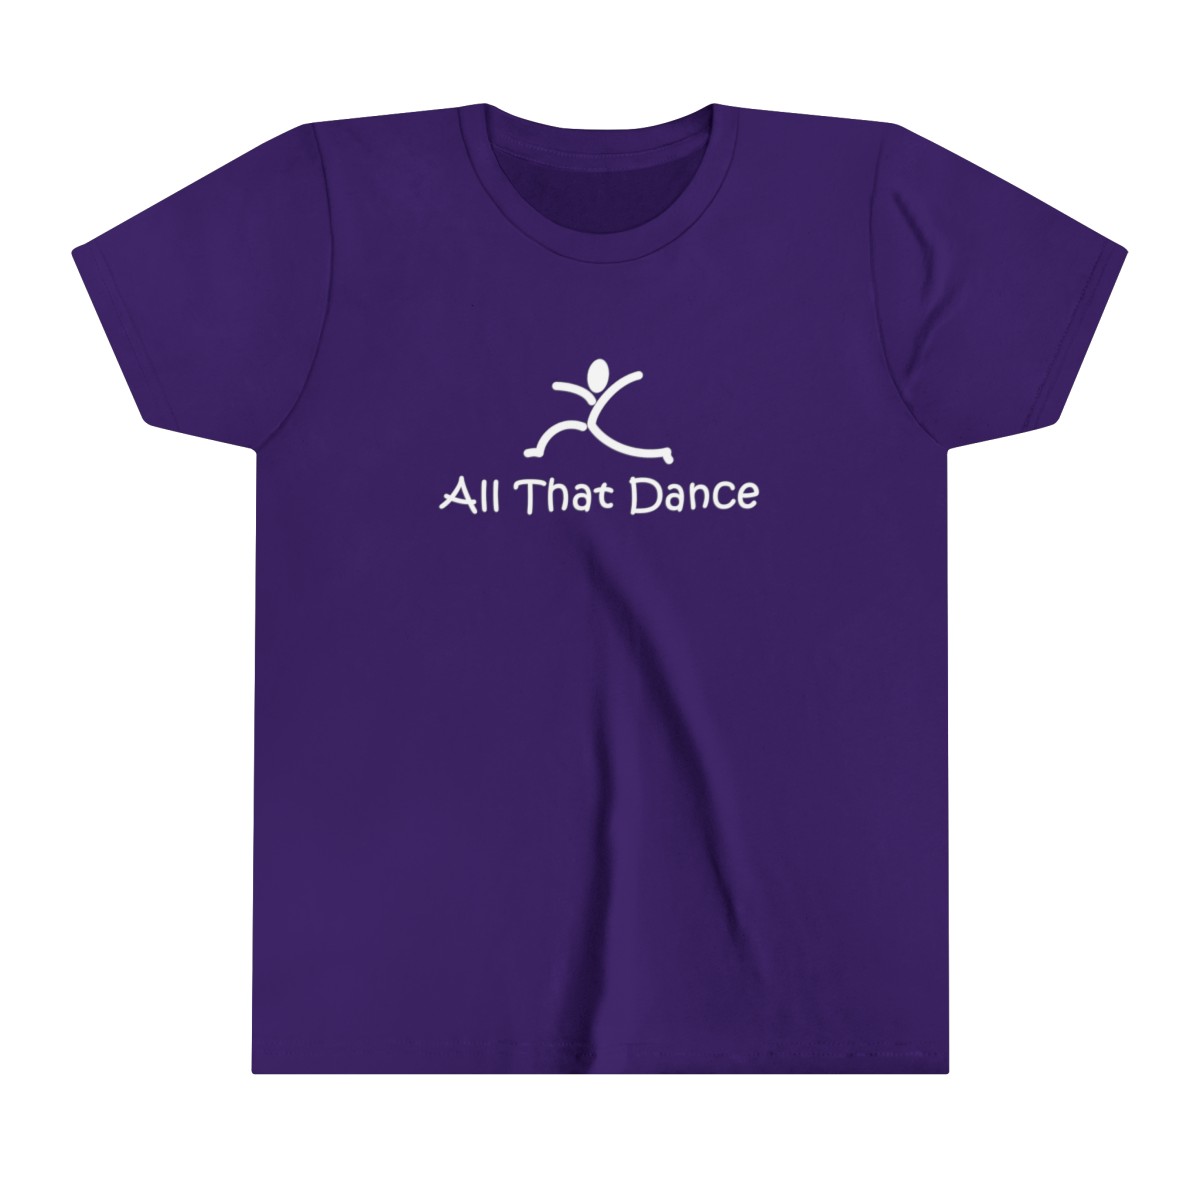 Youth Sizes - -ll That Dance Tshirts product thumbnail image